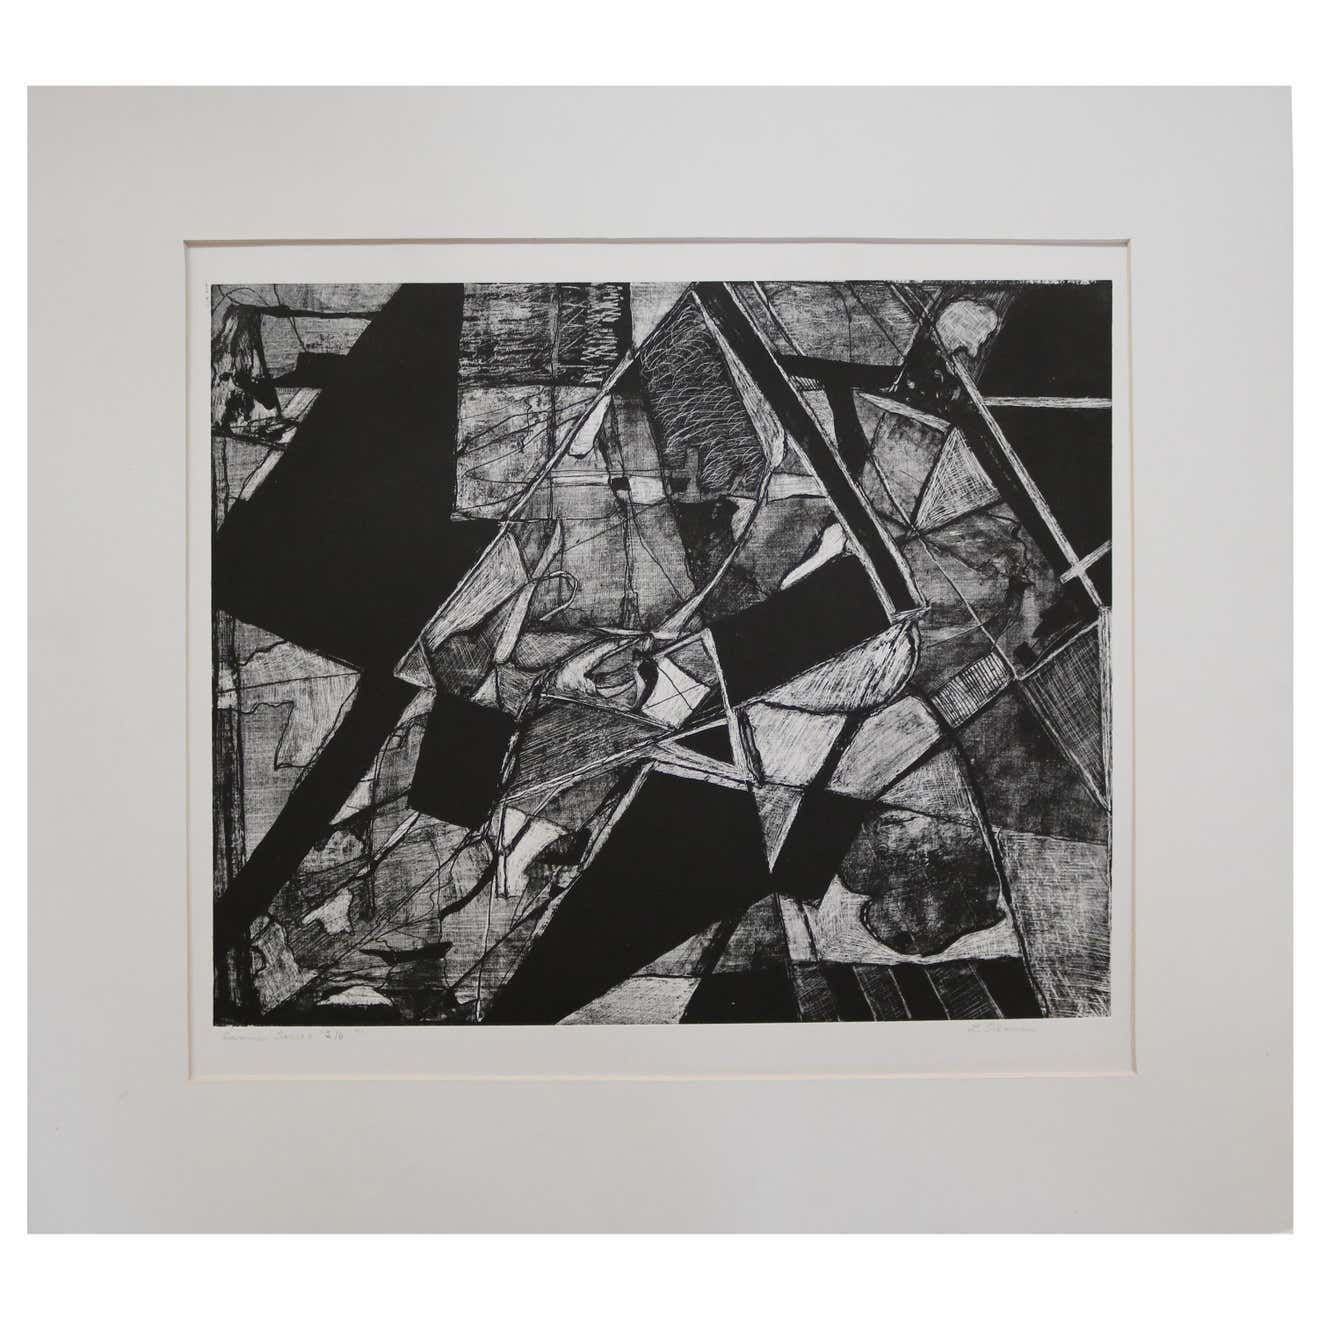 "Summer Series 2/6" Black and White Abstract Lithograph Signed L. Siekman